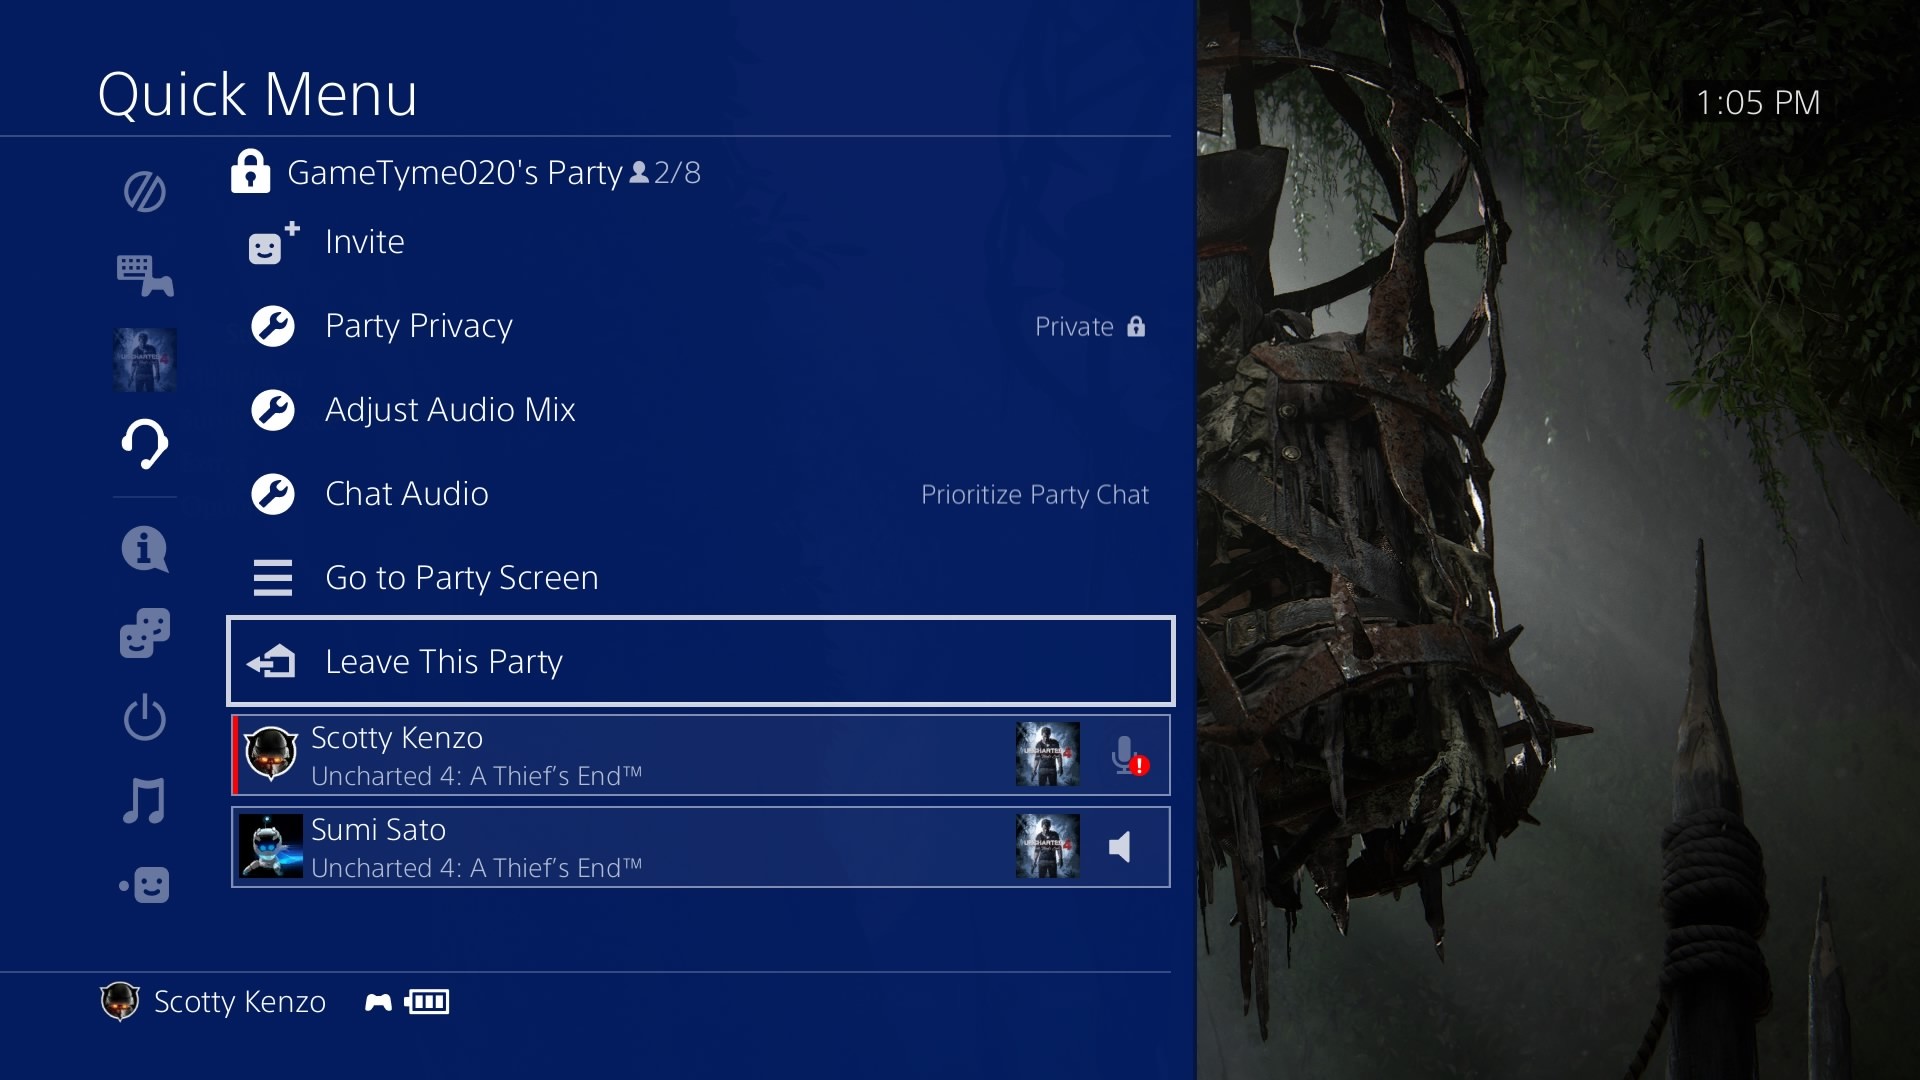 update file for reinstallation ps4 6.50